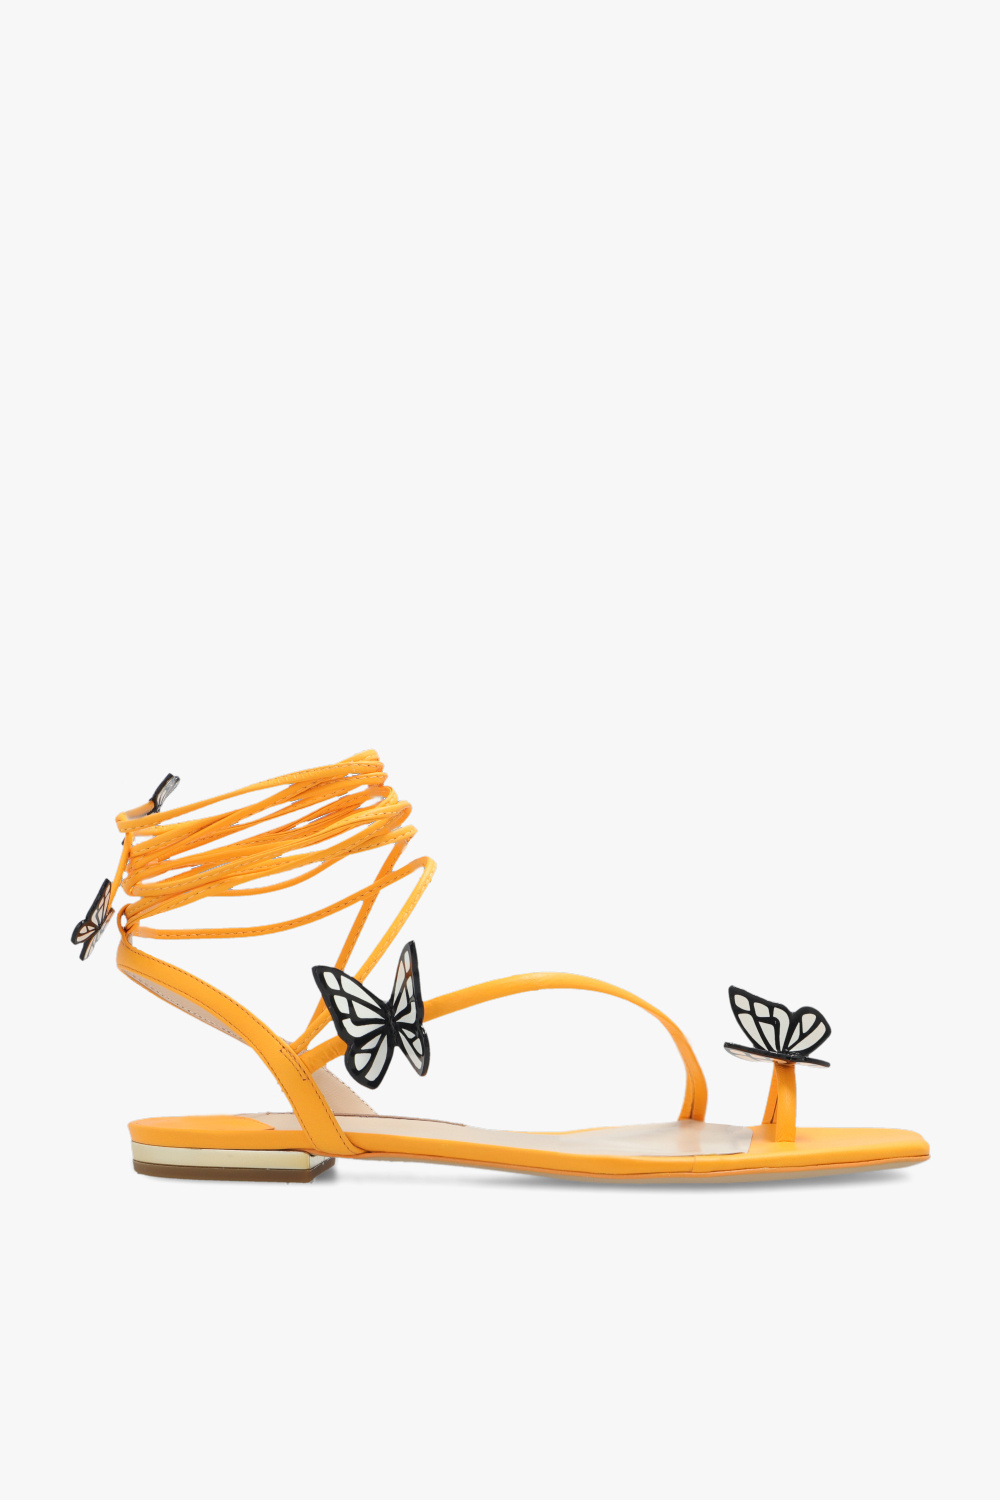 Sophia Webster ‘Vanessa’ sandals with ankle ties | Women's Shoes | Vitkac